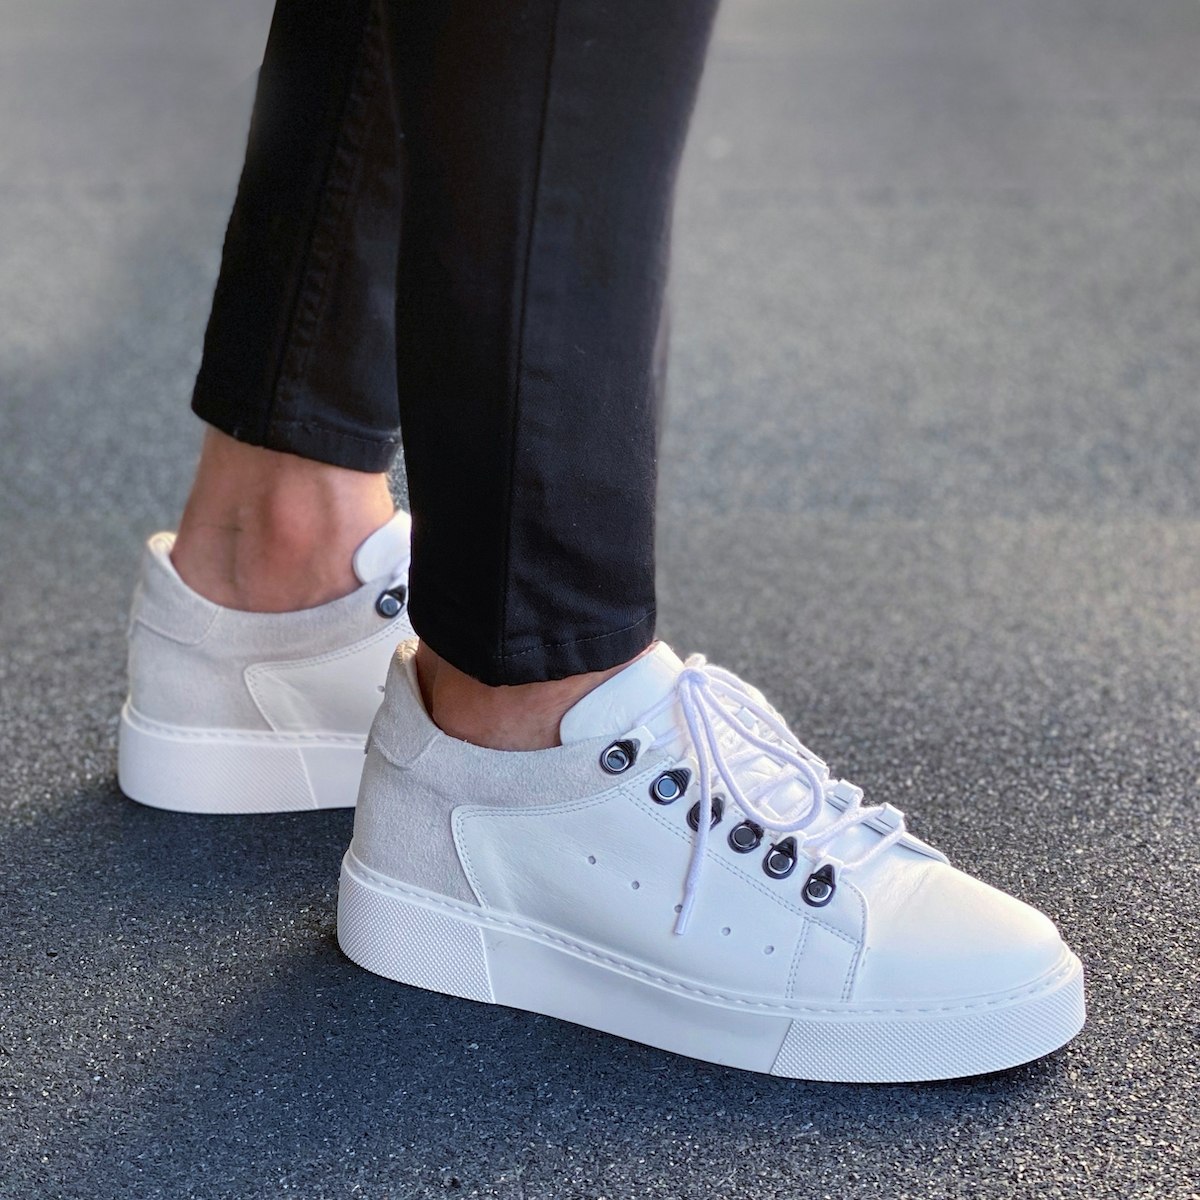 Men’s Leather Sneakers Shoes White | Martin Valen